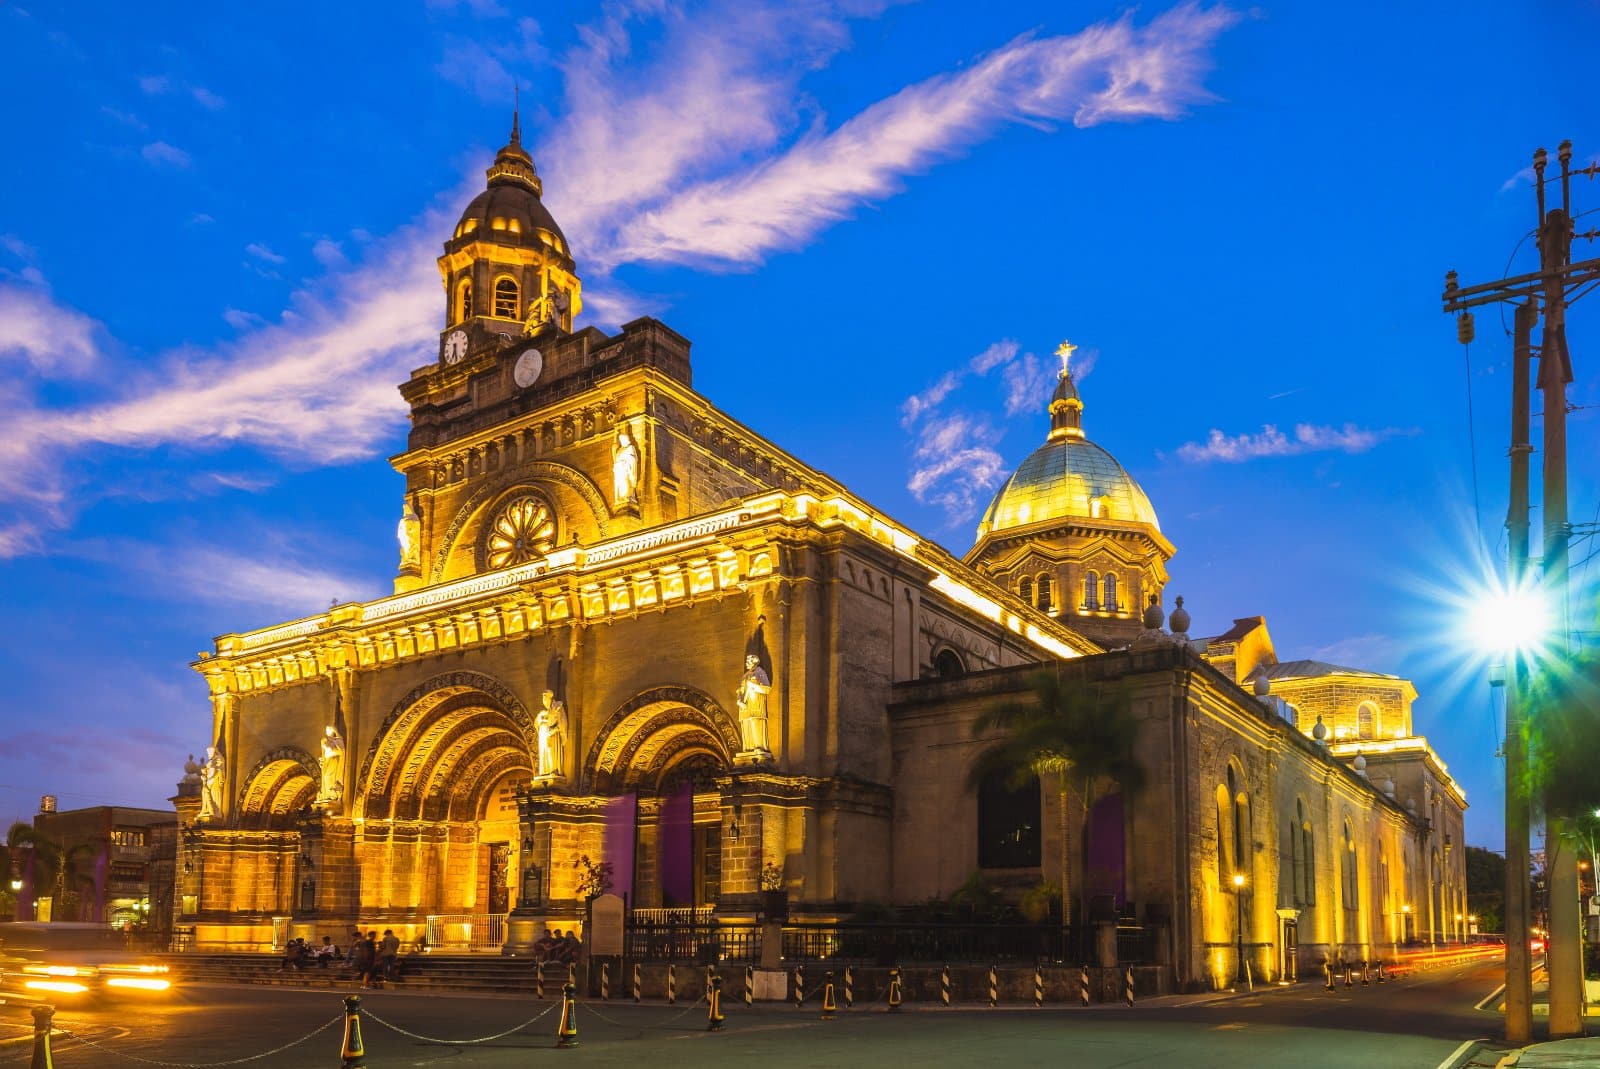 <p class="wp-caption-text">Image Credit: Shutterstock / Richie Chan</p>  <p><span>Intramuros, known as the “Walled City,” is the historical heart of Manila. Established in the late 16th century by the Spanish, it was the seat of government and religious authority during the colonial period. Today, Intramuros is a living museum with ancient walls, churches, and forts highlighting the city’s storied past. A walk through its cobblestone streets offers a glimpse into the architectural grandeur of the Spanish era, highlighted by landmarks such as Fort Santiago, San Agustin Church, and Manila Cathedral. These sites showcase exquisite colonial architecture and narrate the history of Manila through centuries of wars and natural calamities.</span></p>